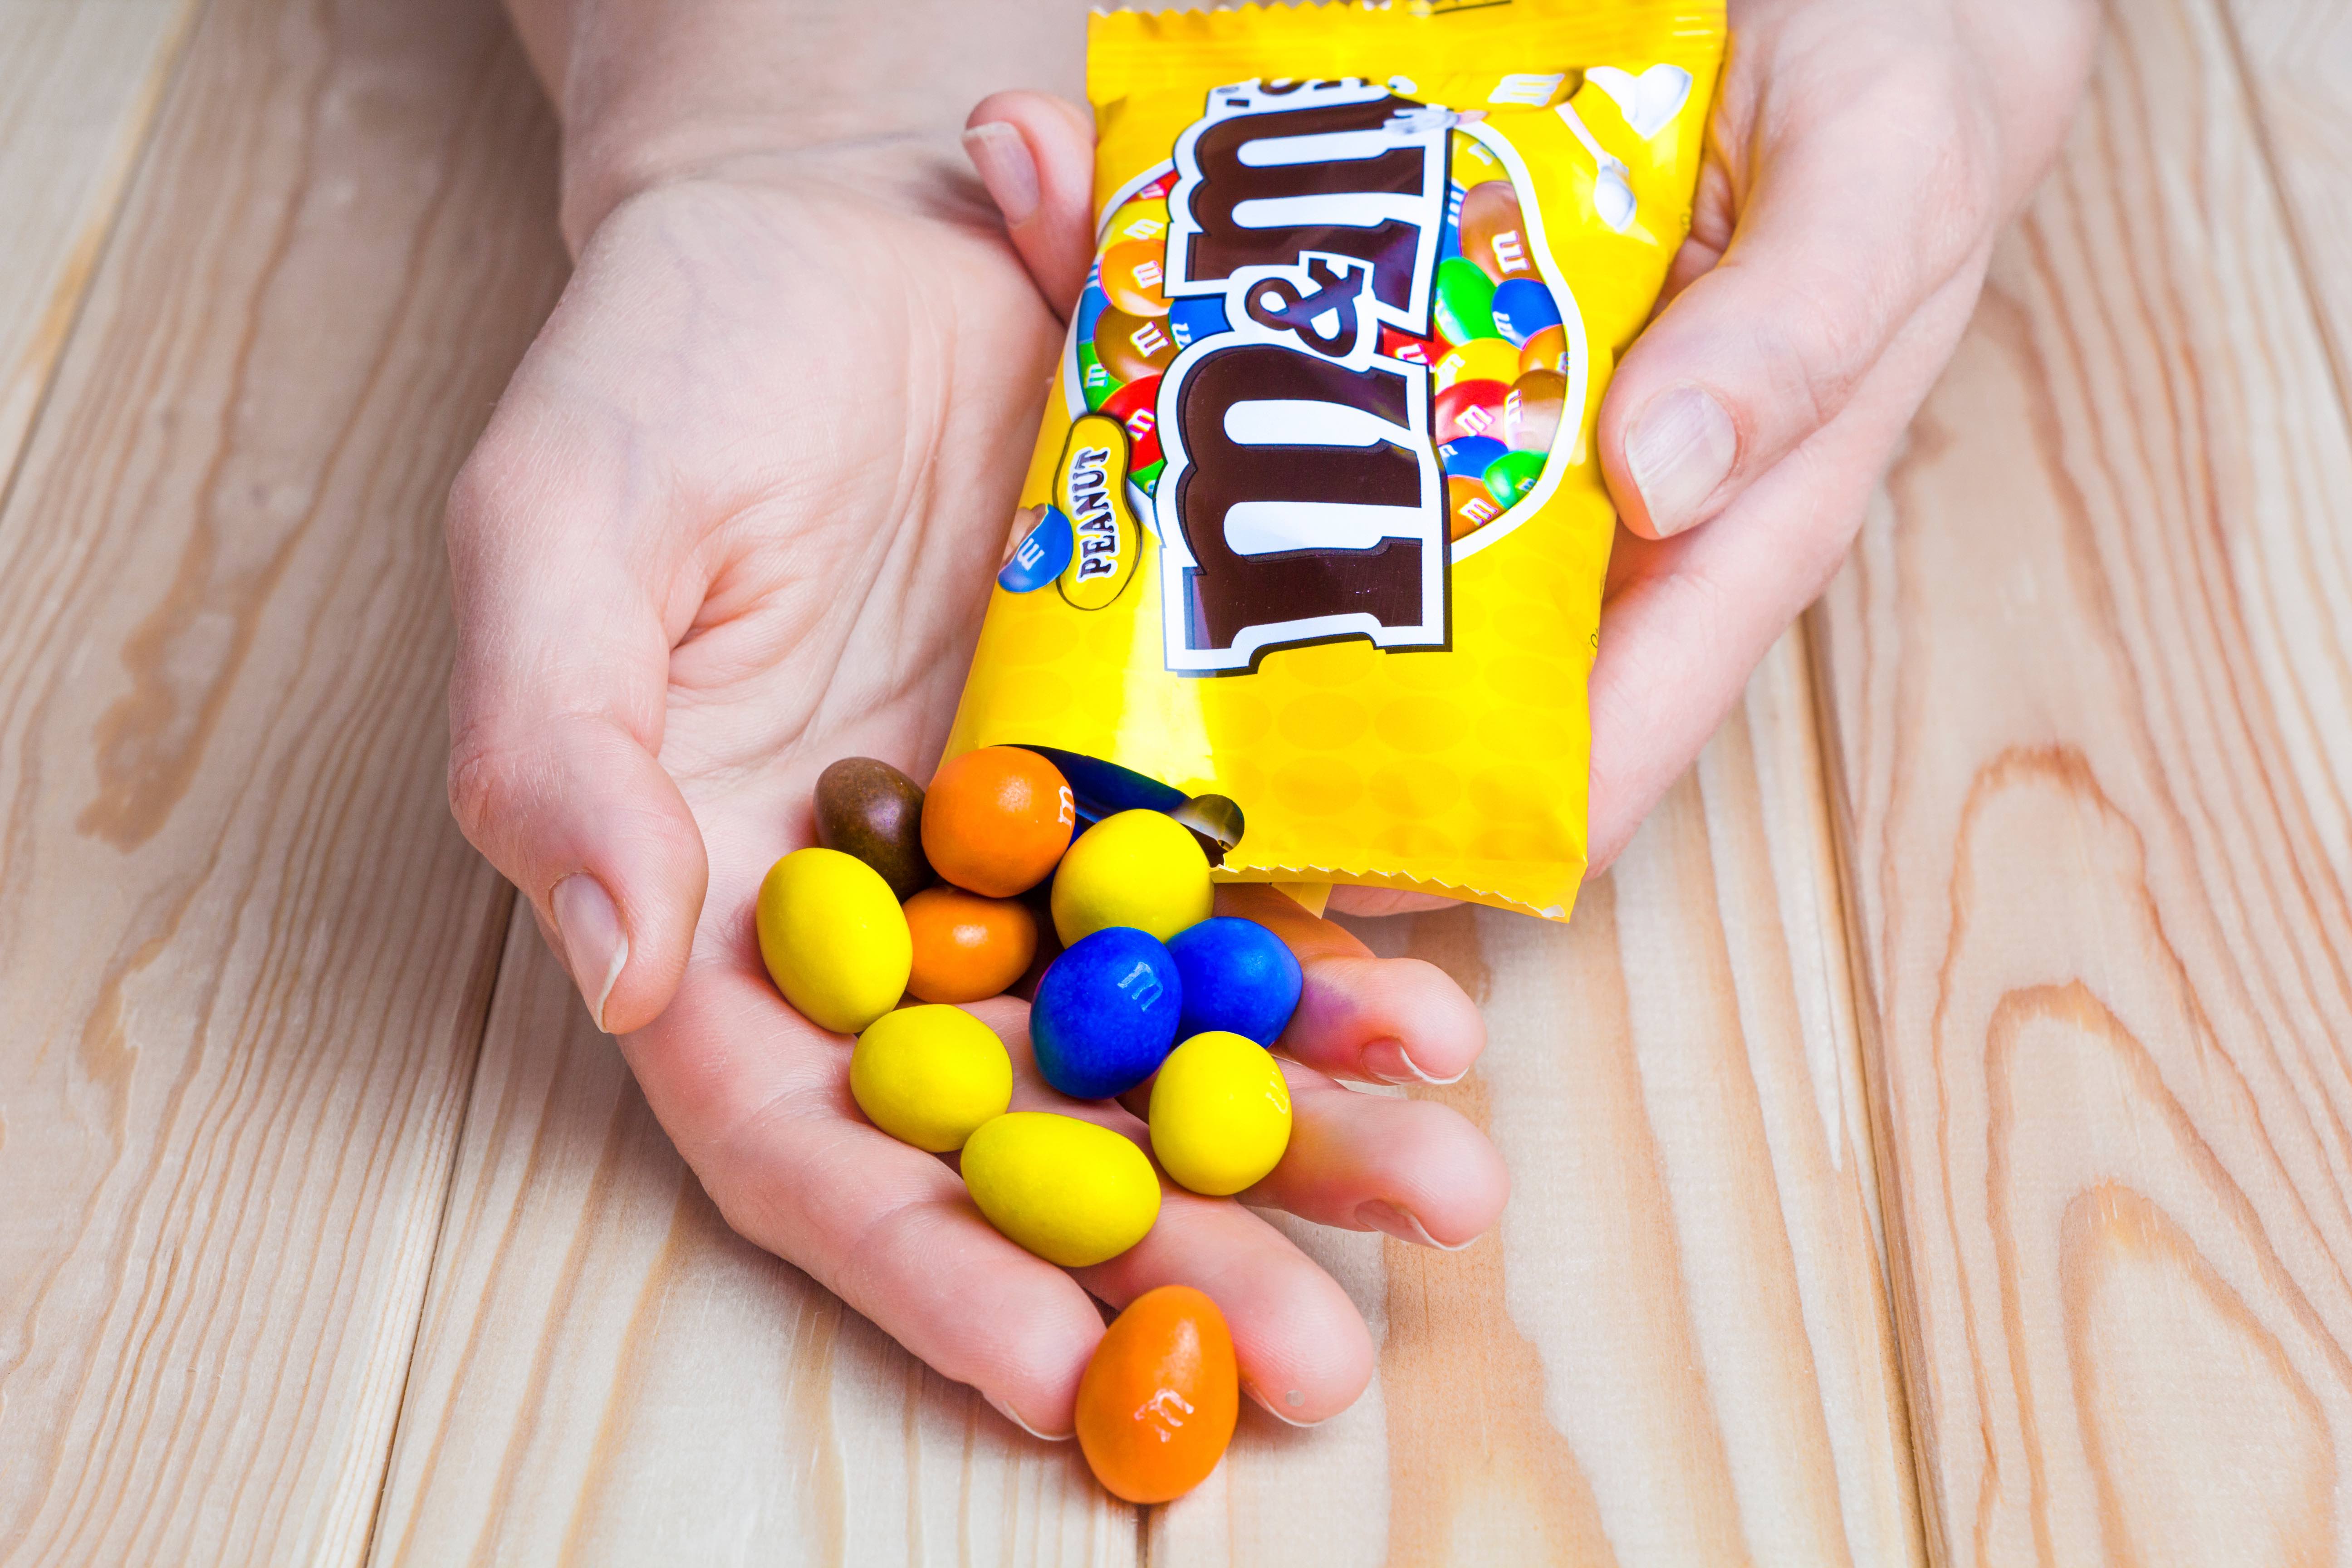 Finding your brown M&Ms